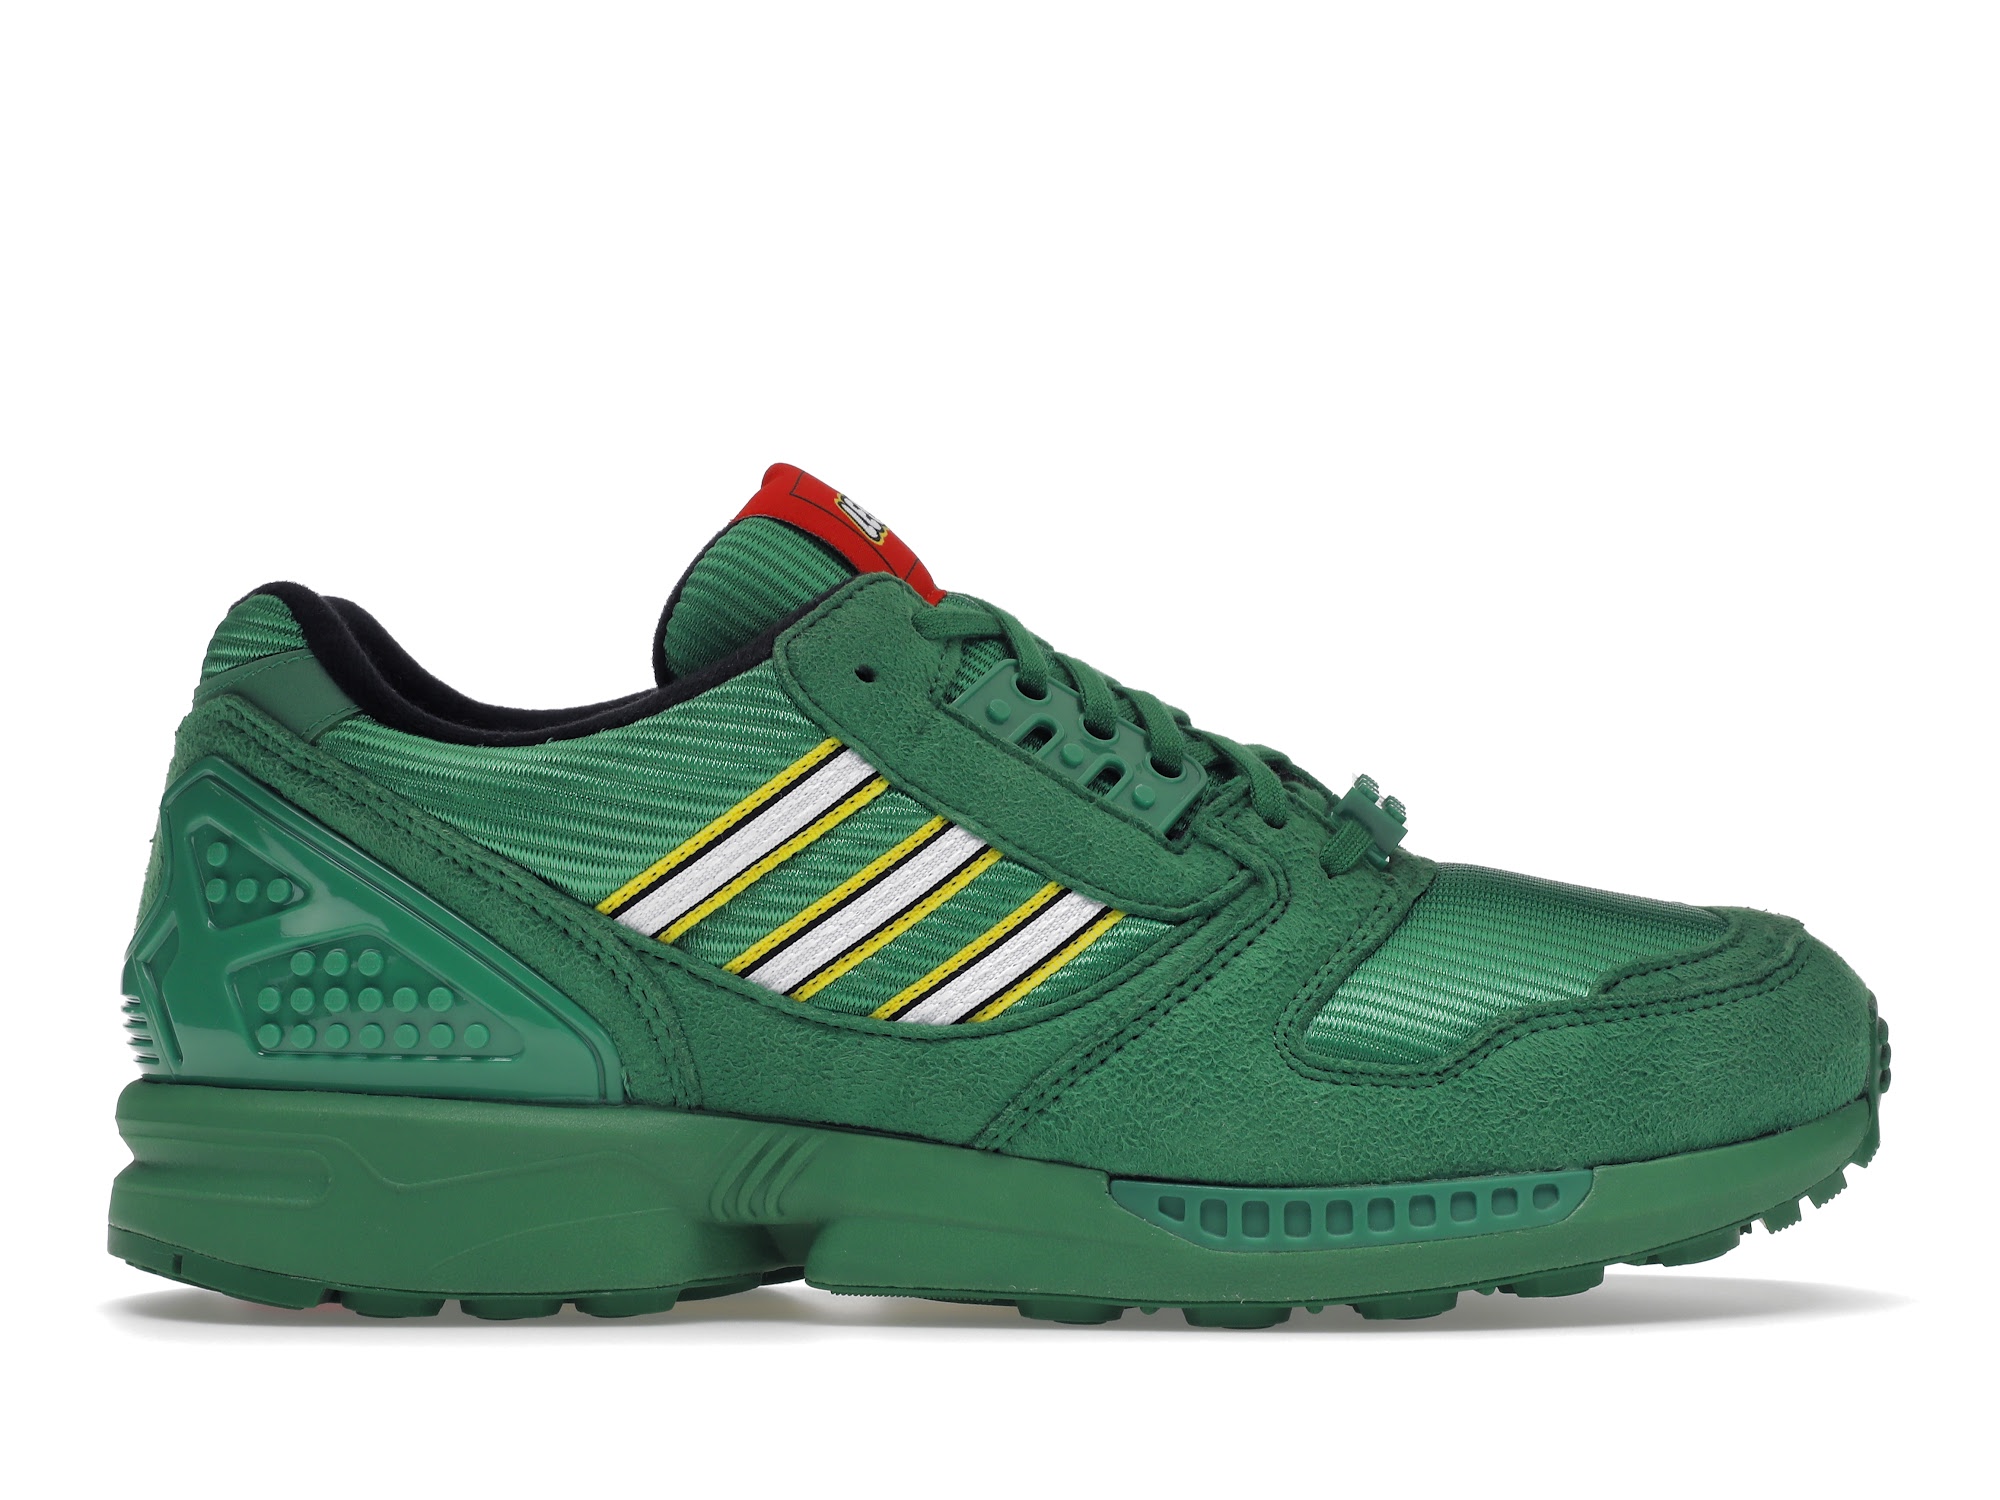 adidas ZX 8000 LEGO Color Pack Green Men's - FY7082 - US